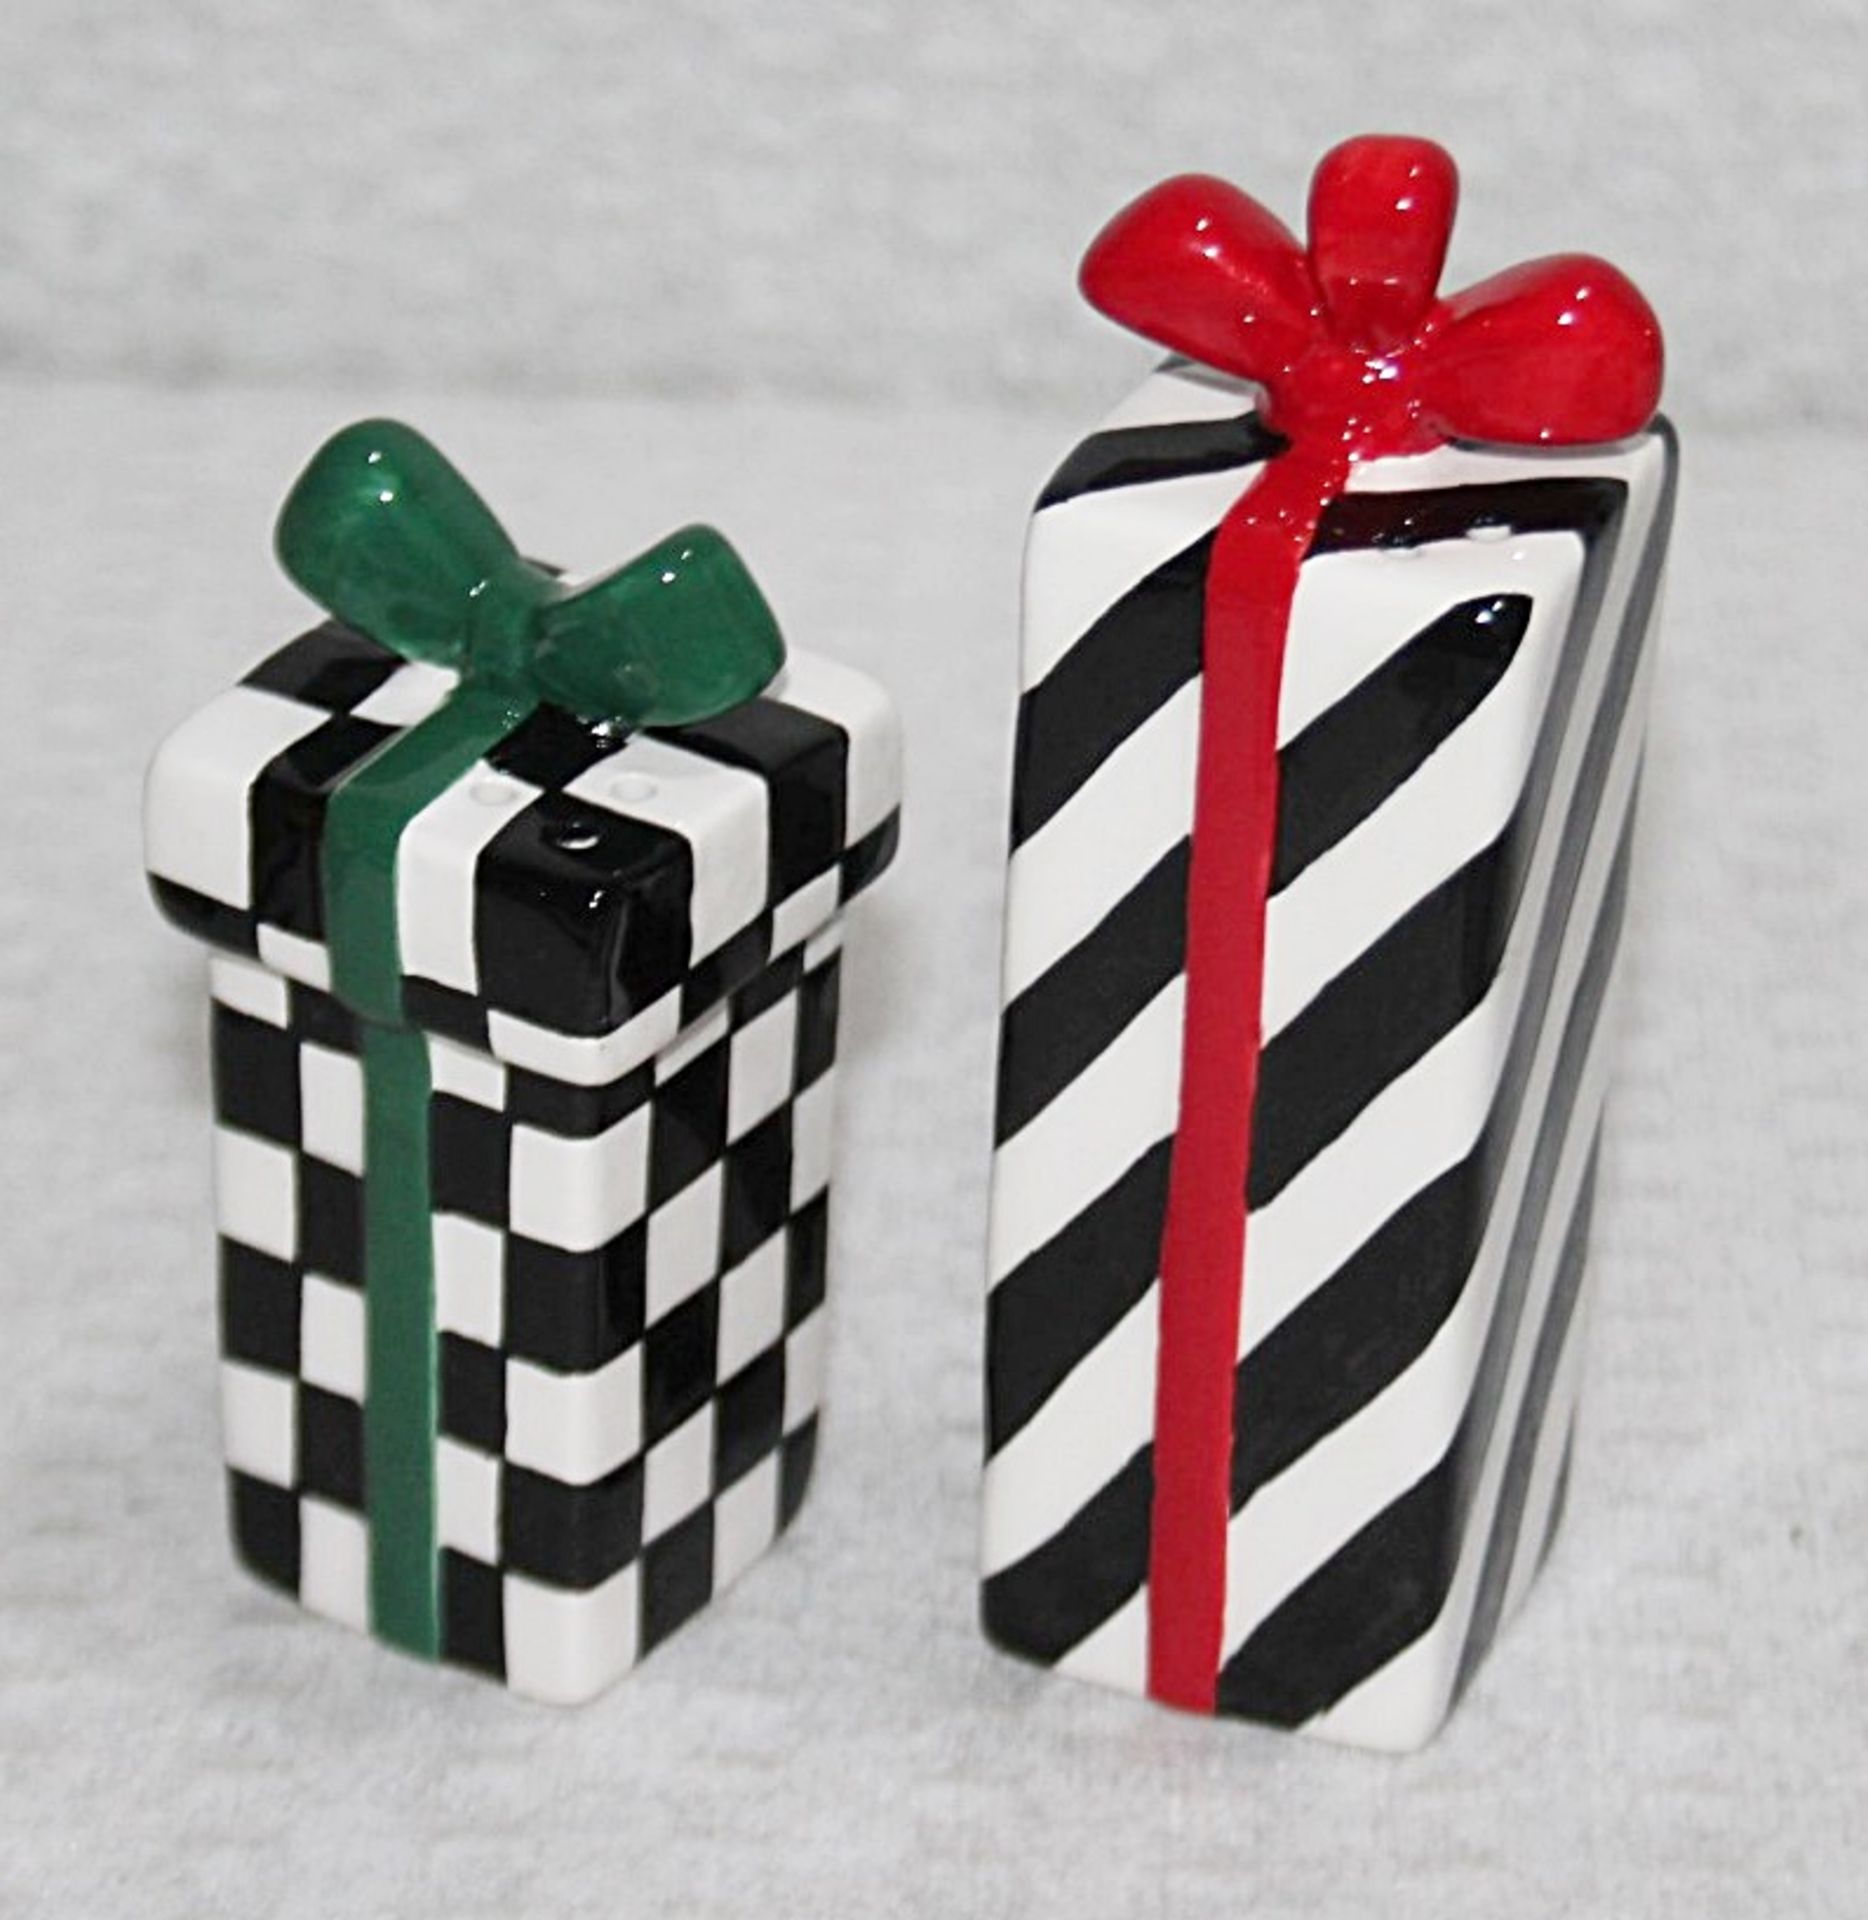 1 x MacKenzie-Childs Hand-painted Salt and Pepper Shaker Set - Dimensions: H18 x W11 x D10cm - - Image 2 of 7